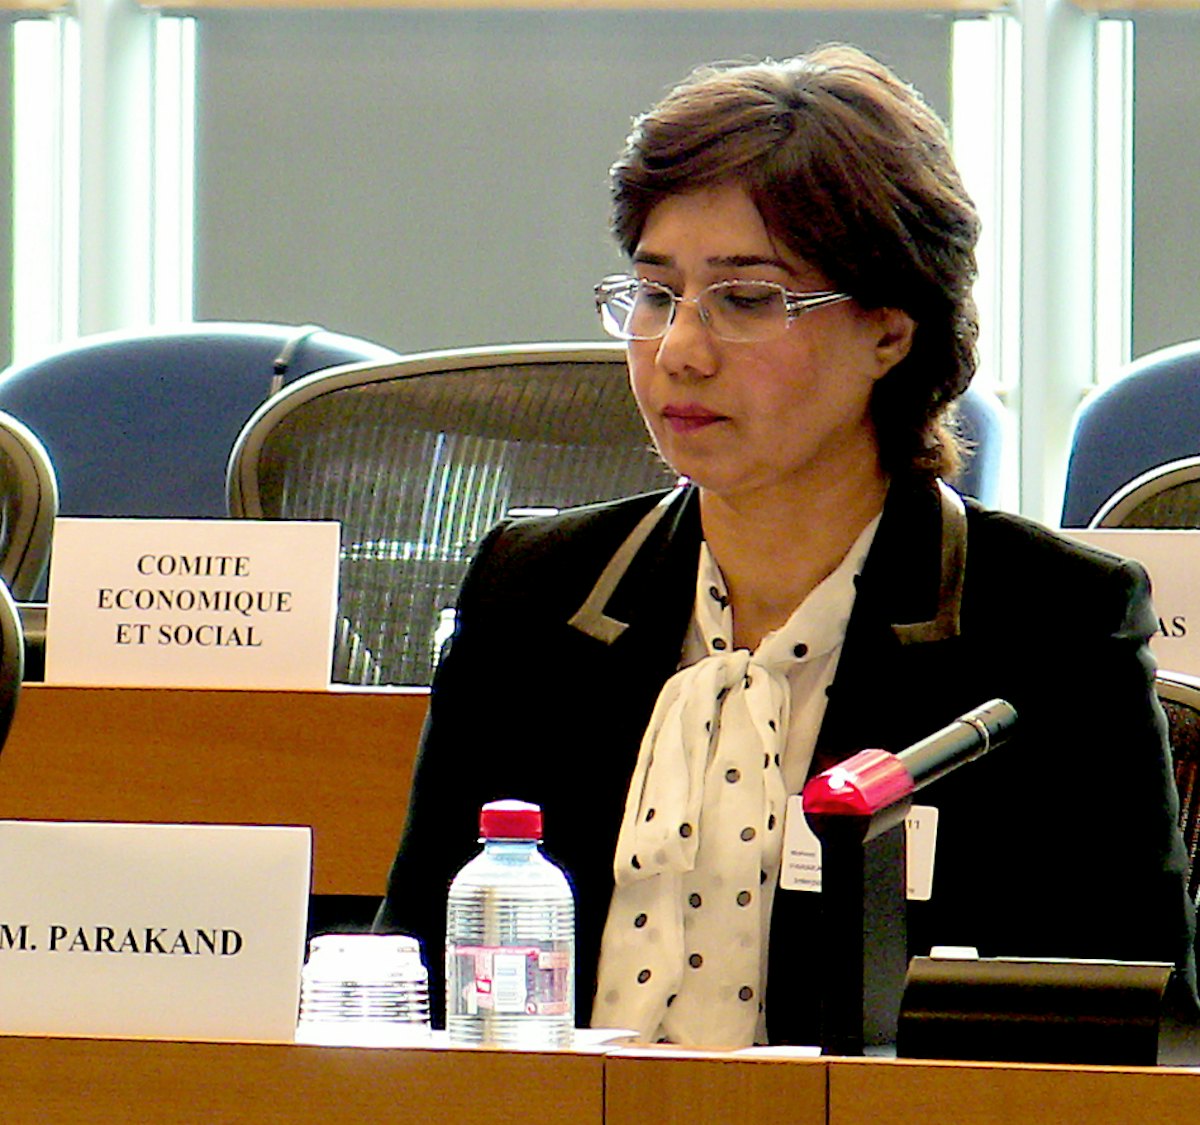 Mahnaz Parakand, one of the lawyers for Iran's seven imprisoned Baha'i leaders, spoke at a meeting held at the European Parliament in Brussels, 28 June 2011. "The pain and suffering that the Baha'is have to endure are in addition to the cruelties suffered by all the people of Iran," said Ms. Parakand.